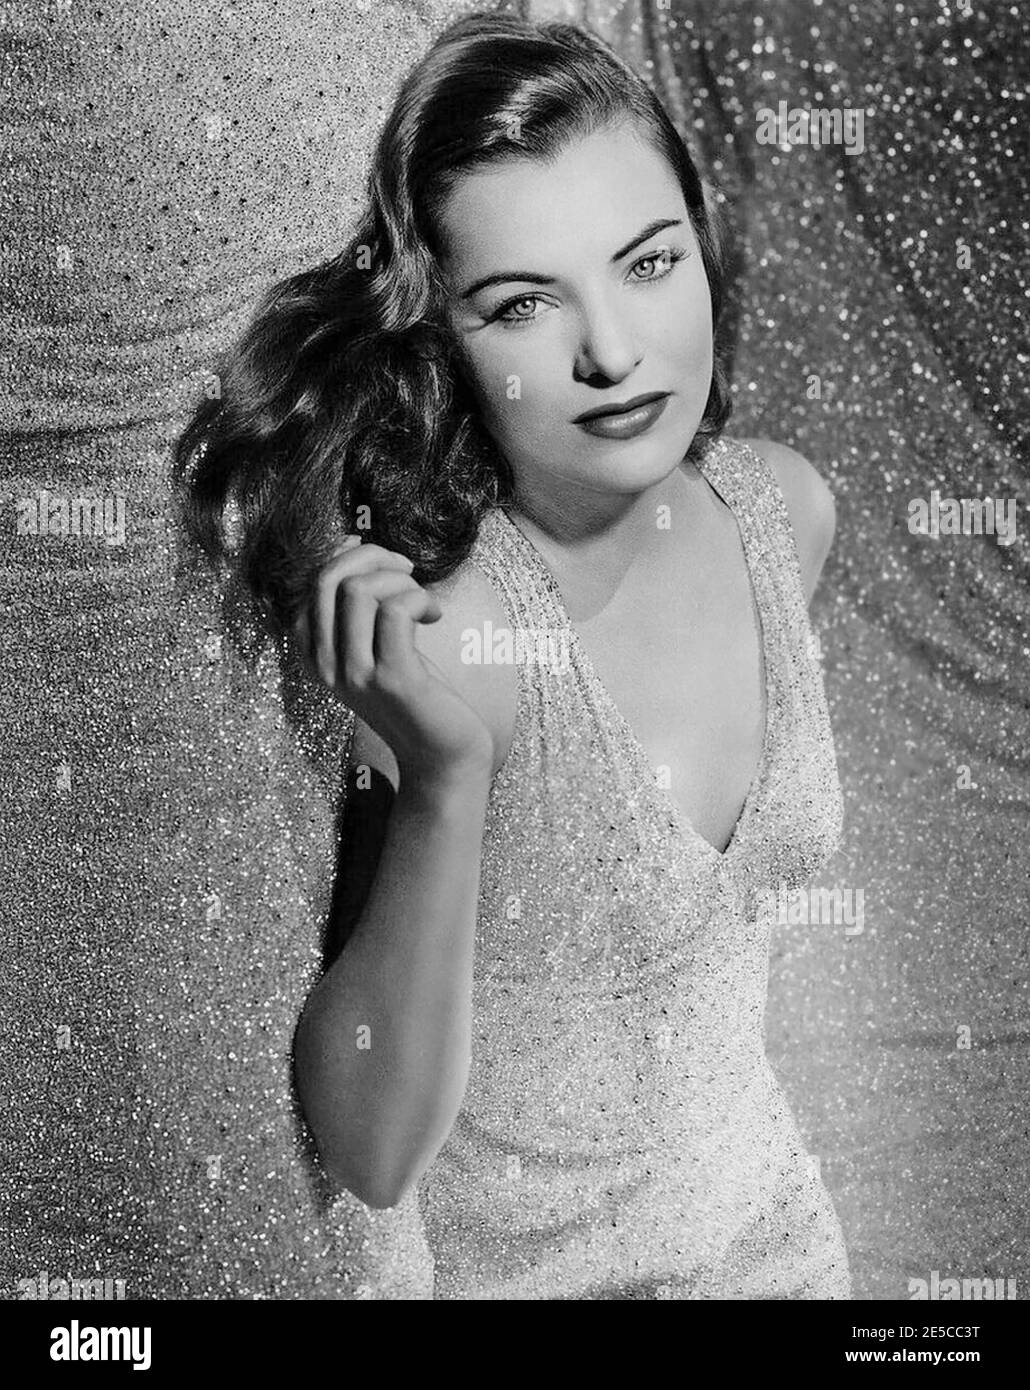 Ella raines Black and White Stock Photos and Images